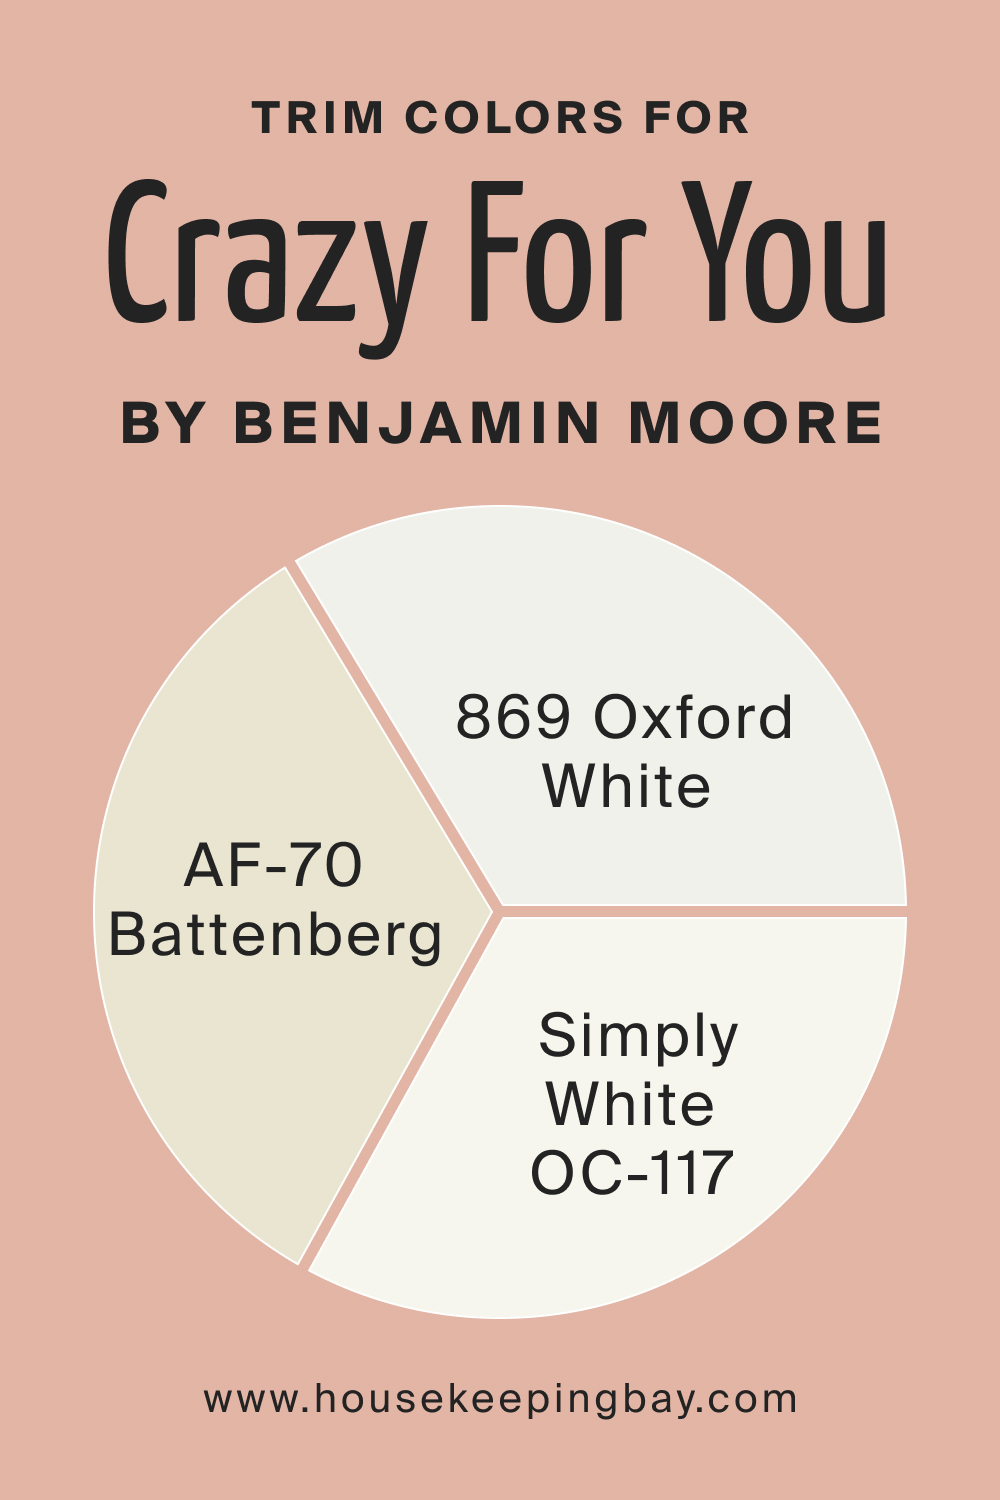 Trim Colors for BM Crazy For You 053 by Benjamin Moore